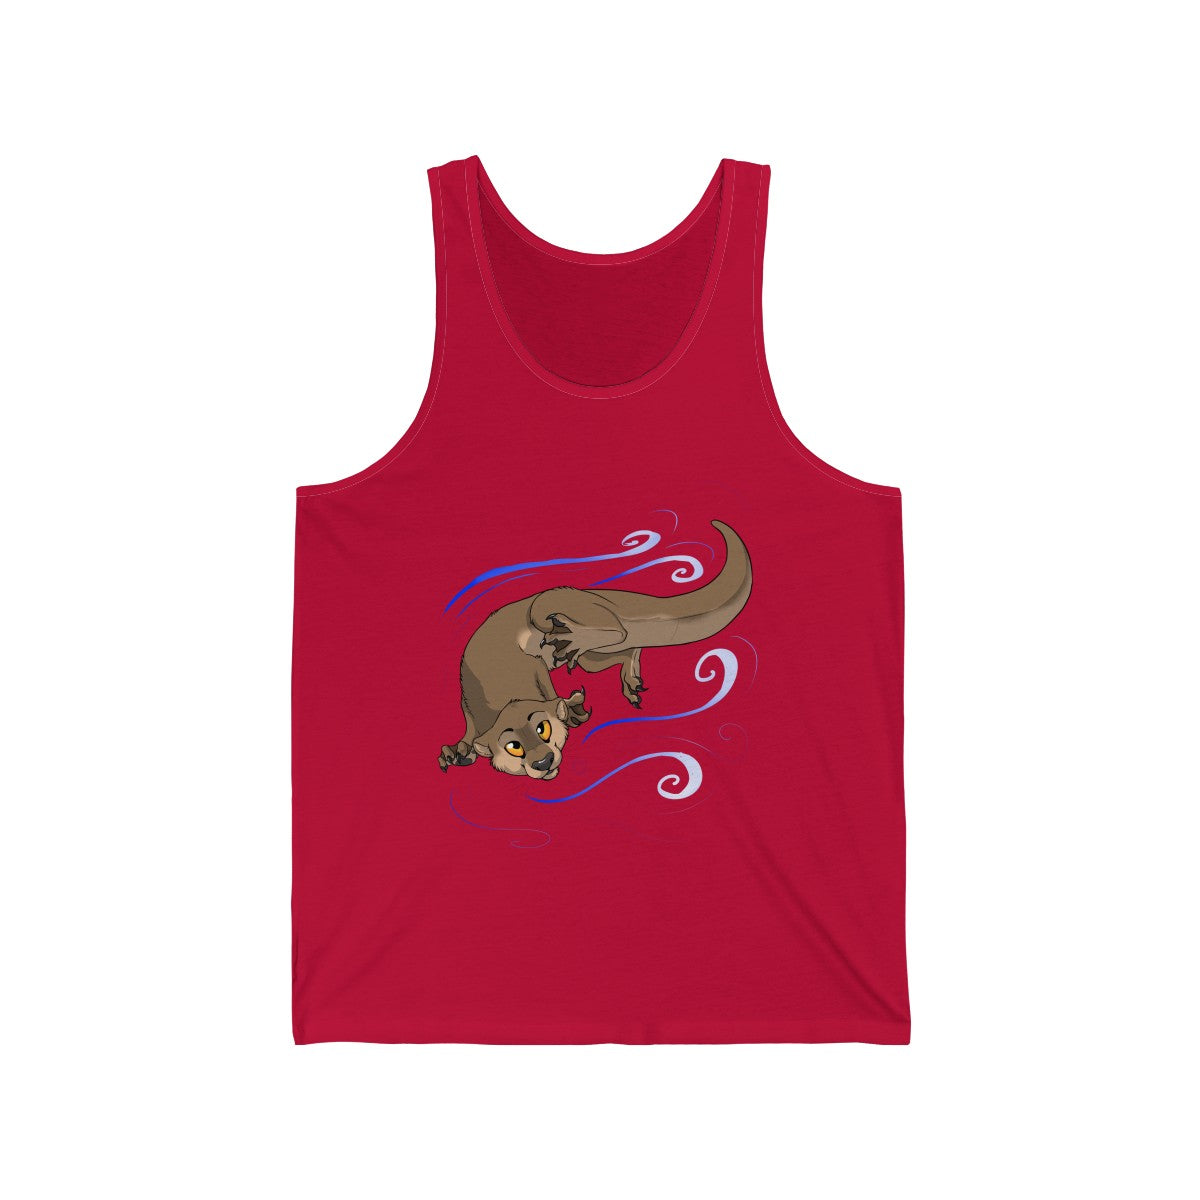 Otter - Tank Top Tank Top Dire Creatures Red XS 